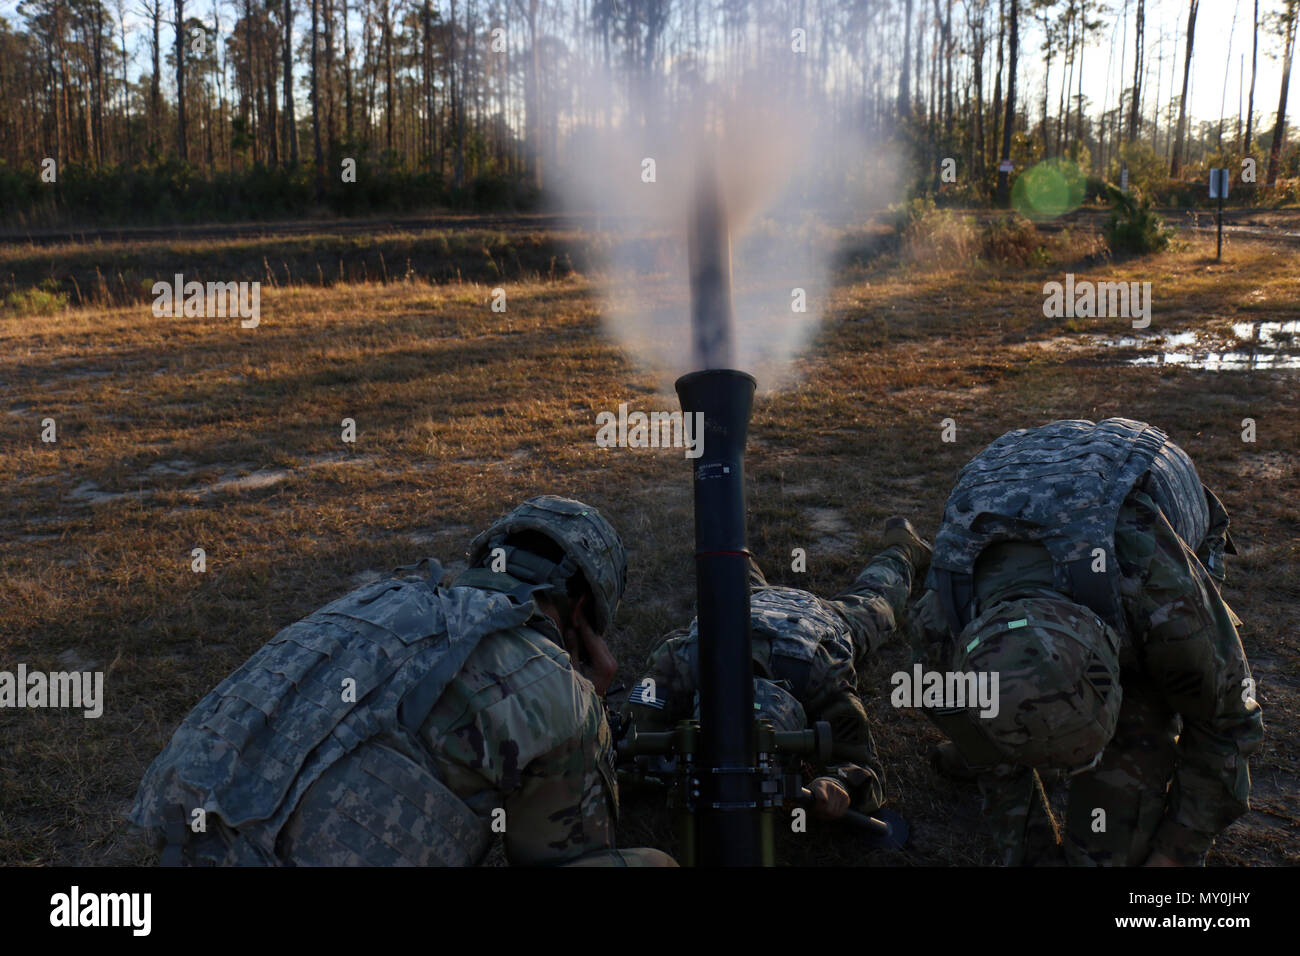 Indirect fire infantrymen with 3rd Battalion, 7th Infantry Regiment, 2nd Infantry Brigade Combat Team, 3rd Infantry Division, fire an 88mm mortar round during a combined arms live-fire exercise (CALFX) at Fort Stewart, Ga., December 15, 2016. The CALFX brought together infantrymen, engineers, artillerymen and air support assets to certify the Bravo 13 range complex. Bravo 13 is a newly configured light infantry range designed for company live fire exercises at Fort Stewart. (U.S Army photo by Spc. Efren Rodriguez/Released) Stock Photo